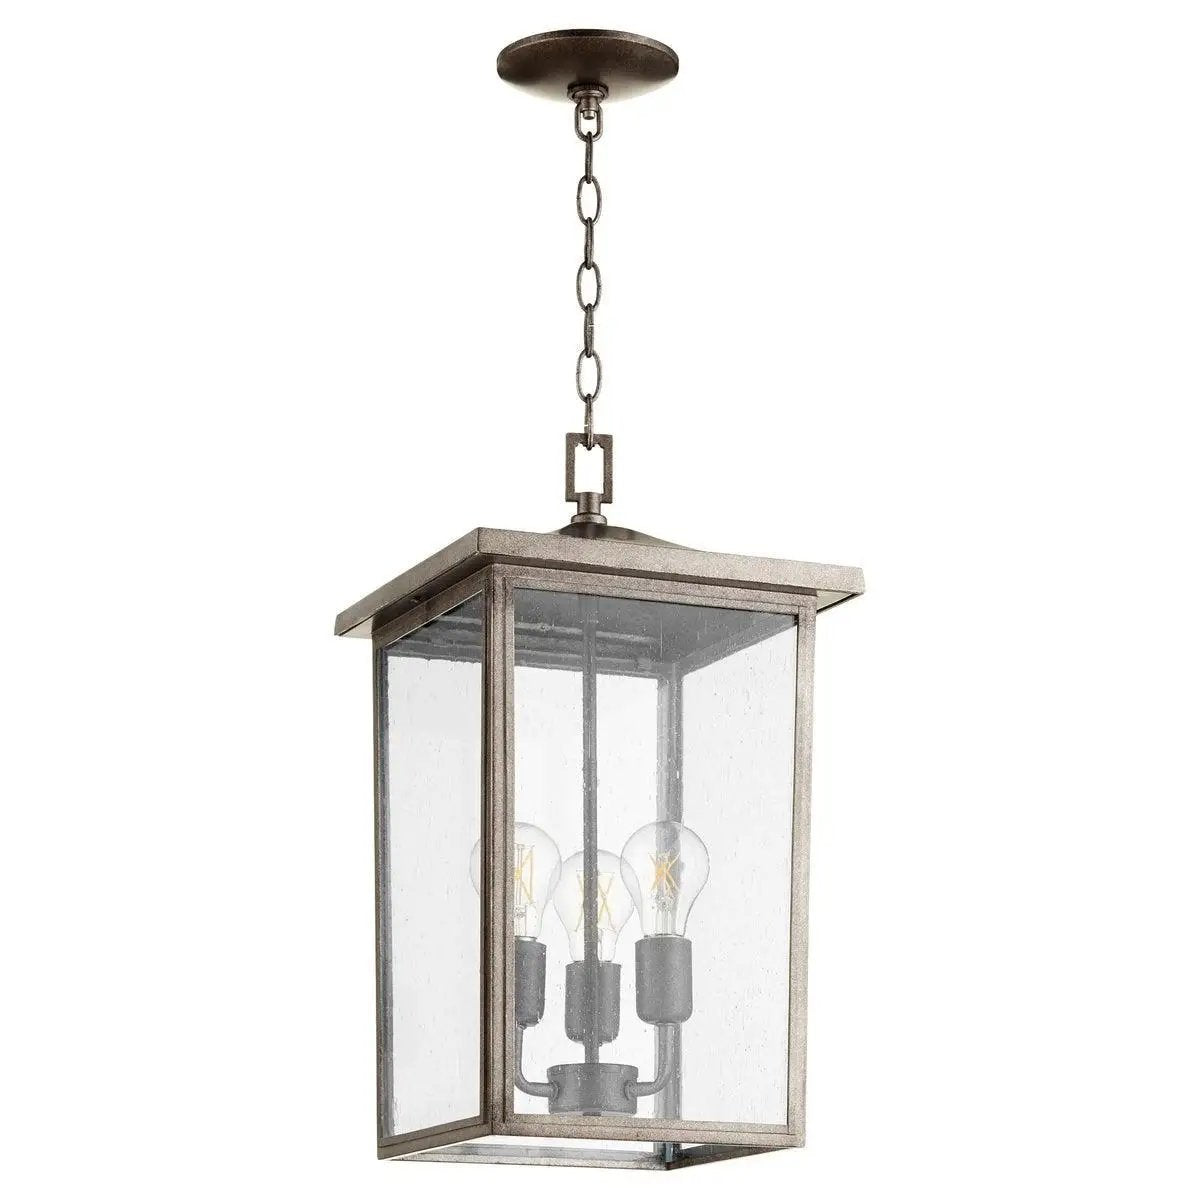 Farmhouse Outdoor Hanging Lantern with glass and metal frame, featuring three 60W medium base light sources. Clear-seeded glass enclosure provides warm ambient glow. Perfect for covered porch or patio.